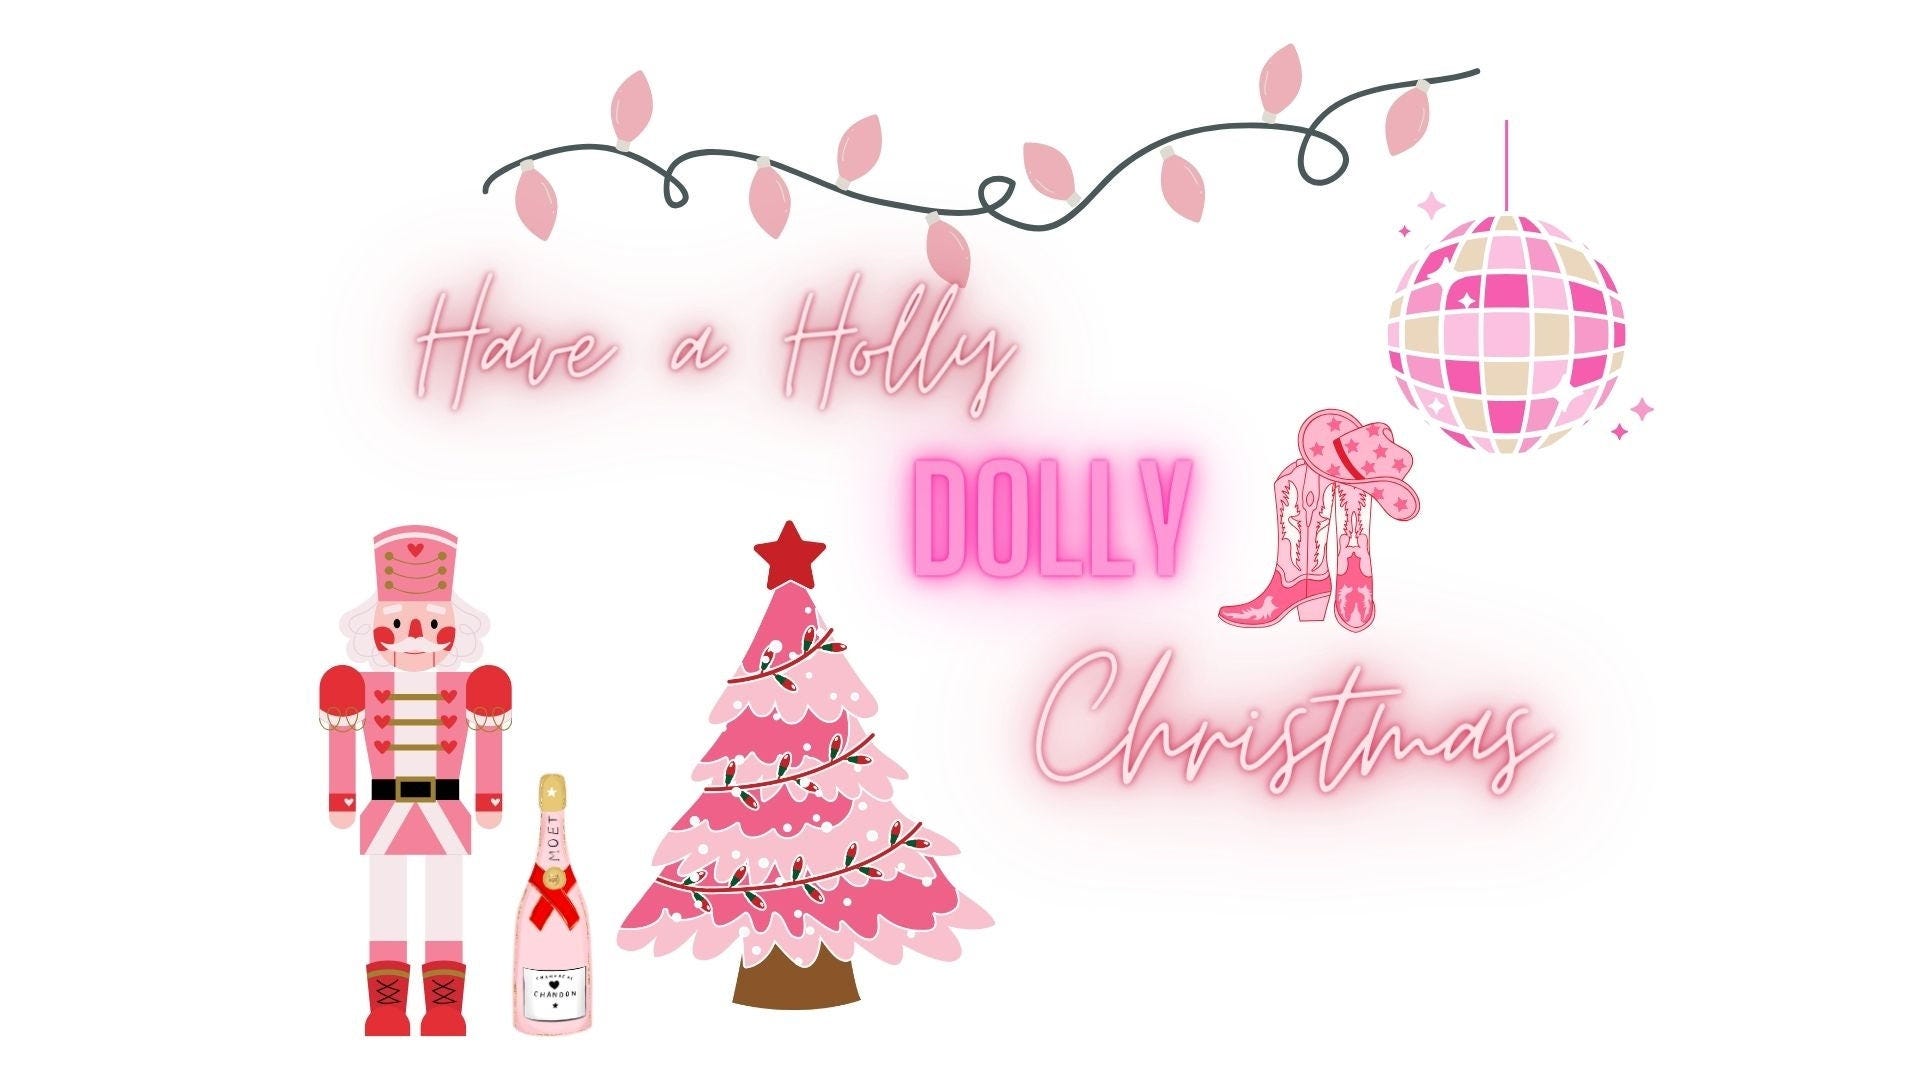 Have a Holly Dolly Christmas